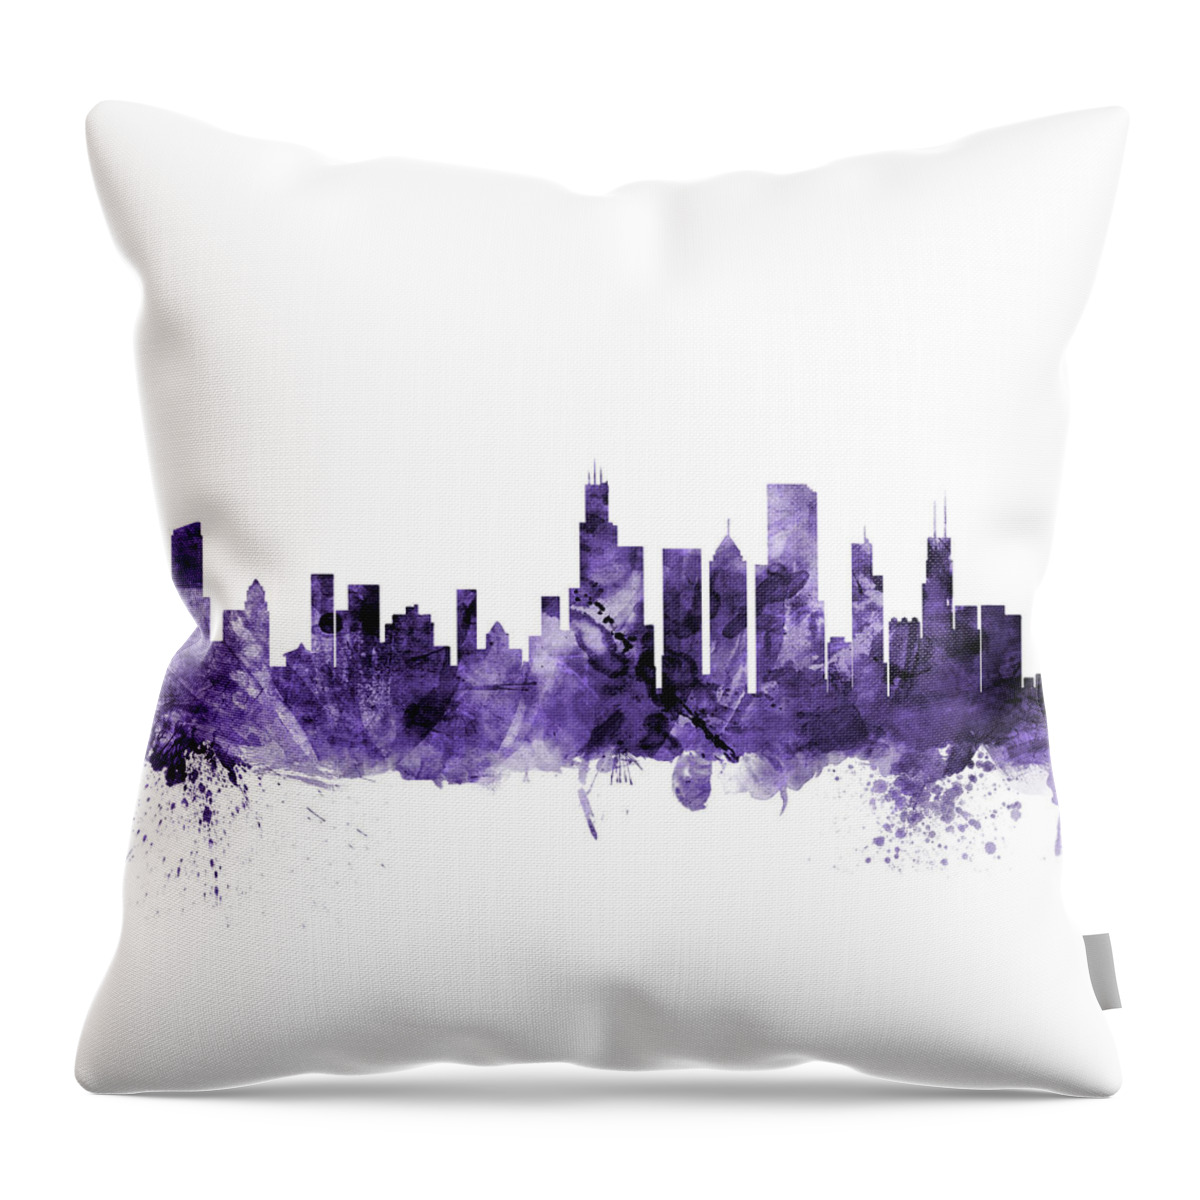 Chicago Throw Pillow featuring the digital art Chicago Illinois Skyline by Michael Tompsett